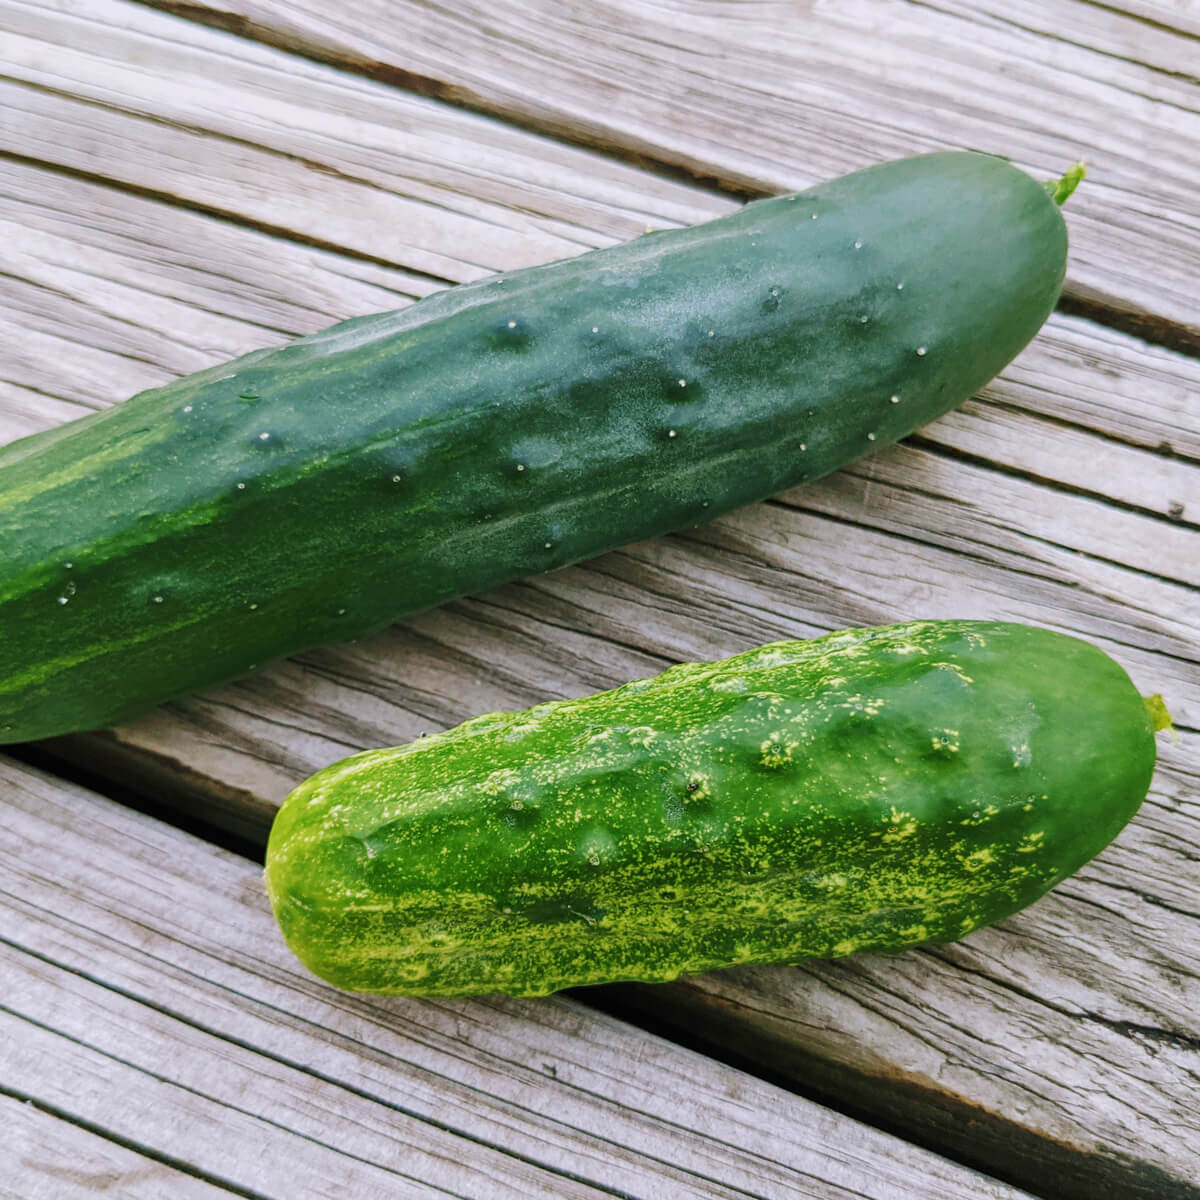 Regular Cucumber and Pickling Cucumber on wooden deck from our 2021 harvest